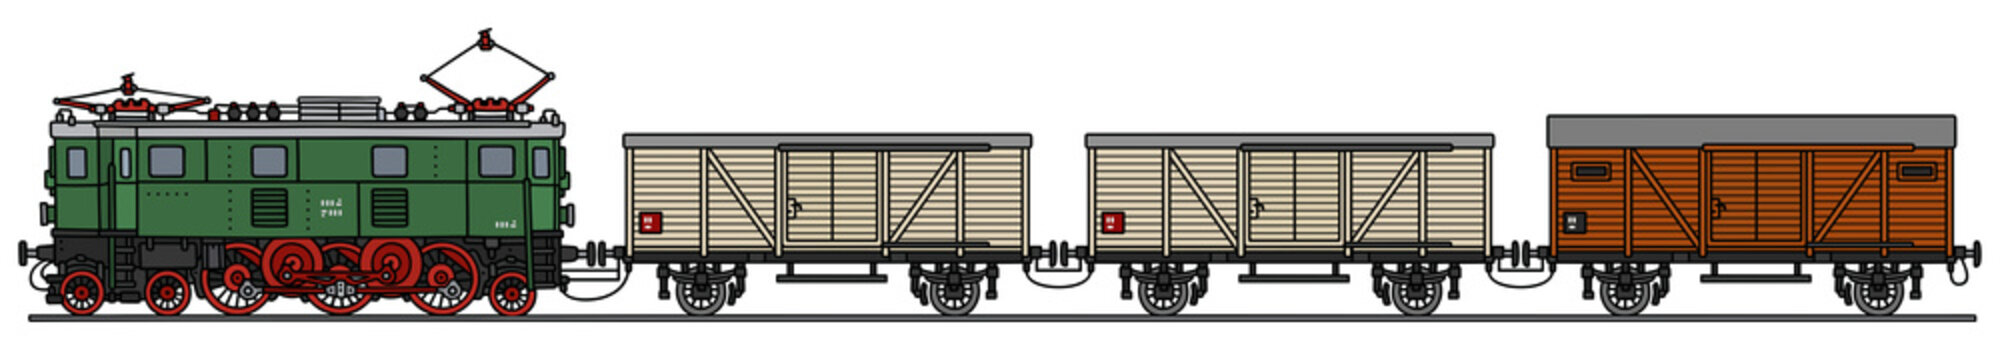 Old electric train / Hand drawing, vector illustration